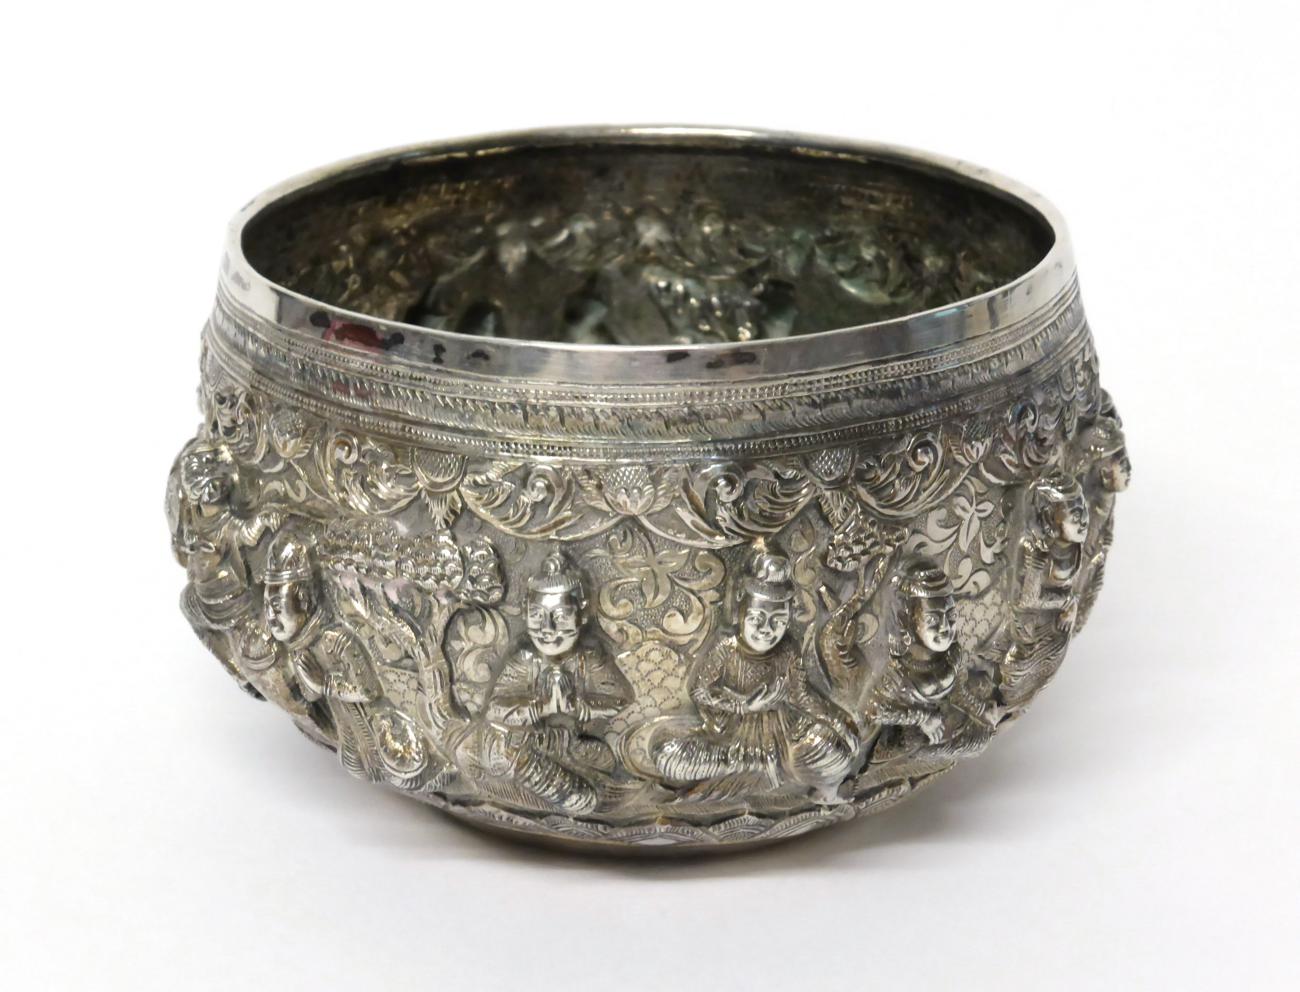 An Indian White Metal Bowl, circular, profusely chased with fourteen deities and Gods including